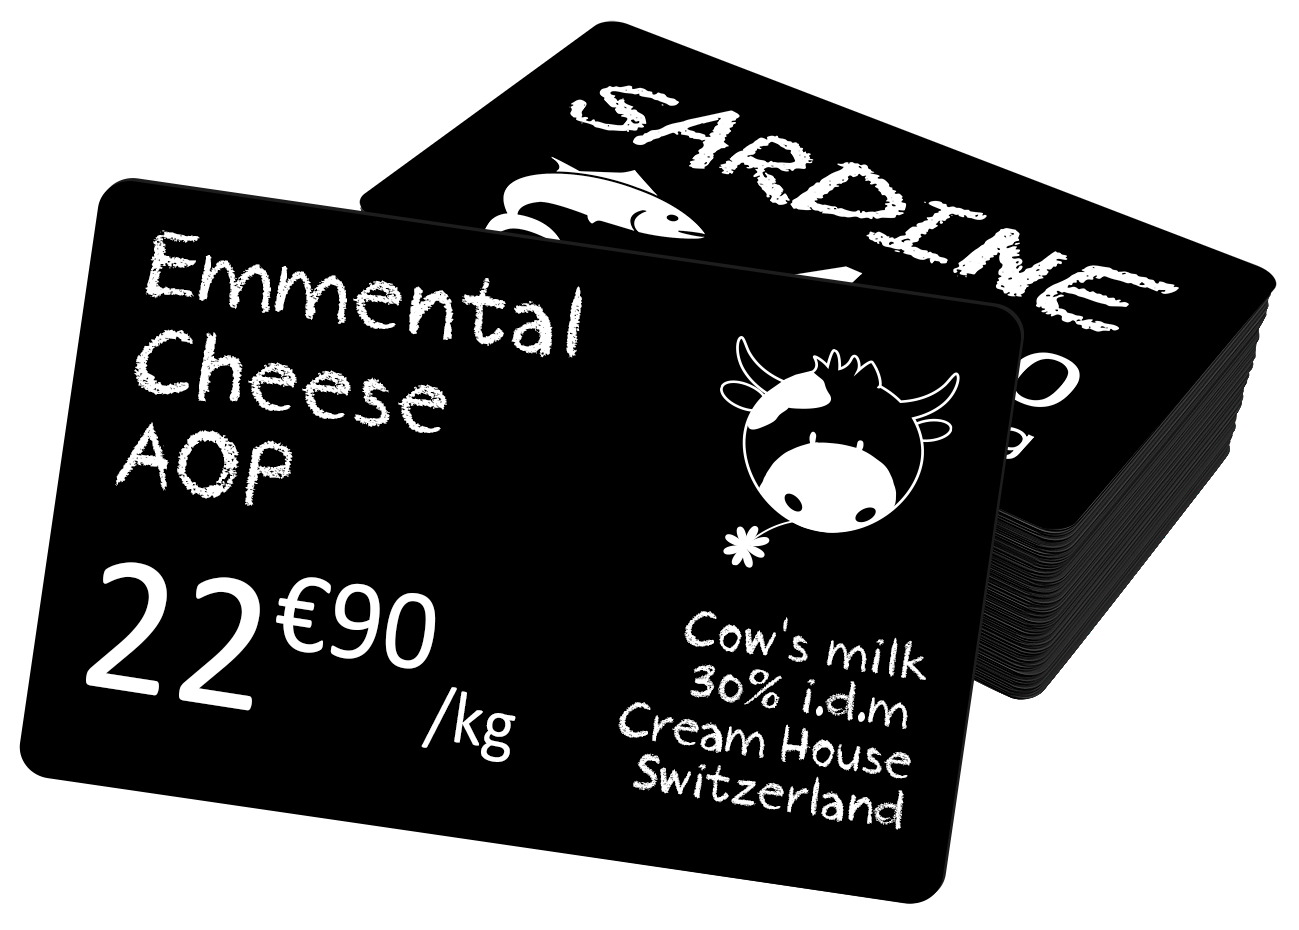 Our solutions for designing and printing your price tags